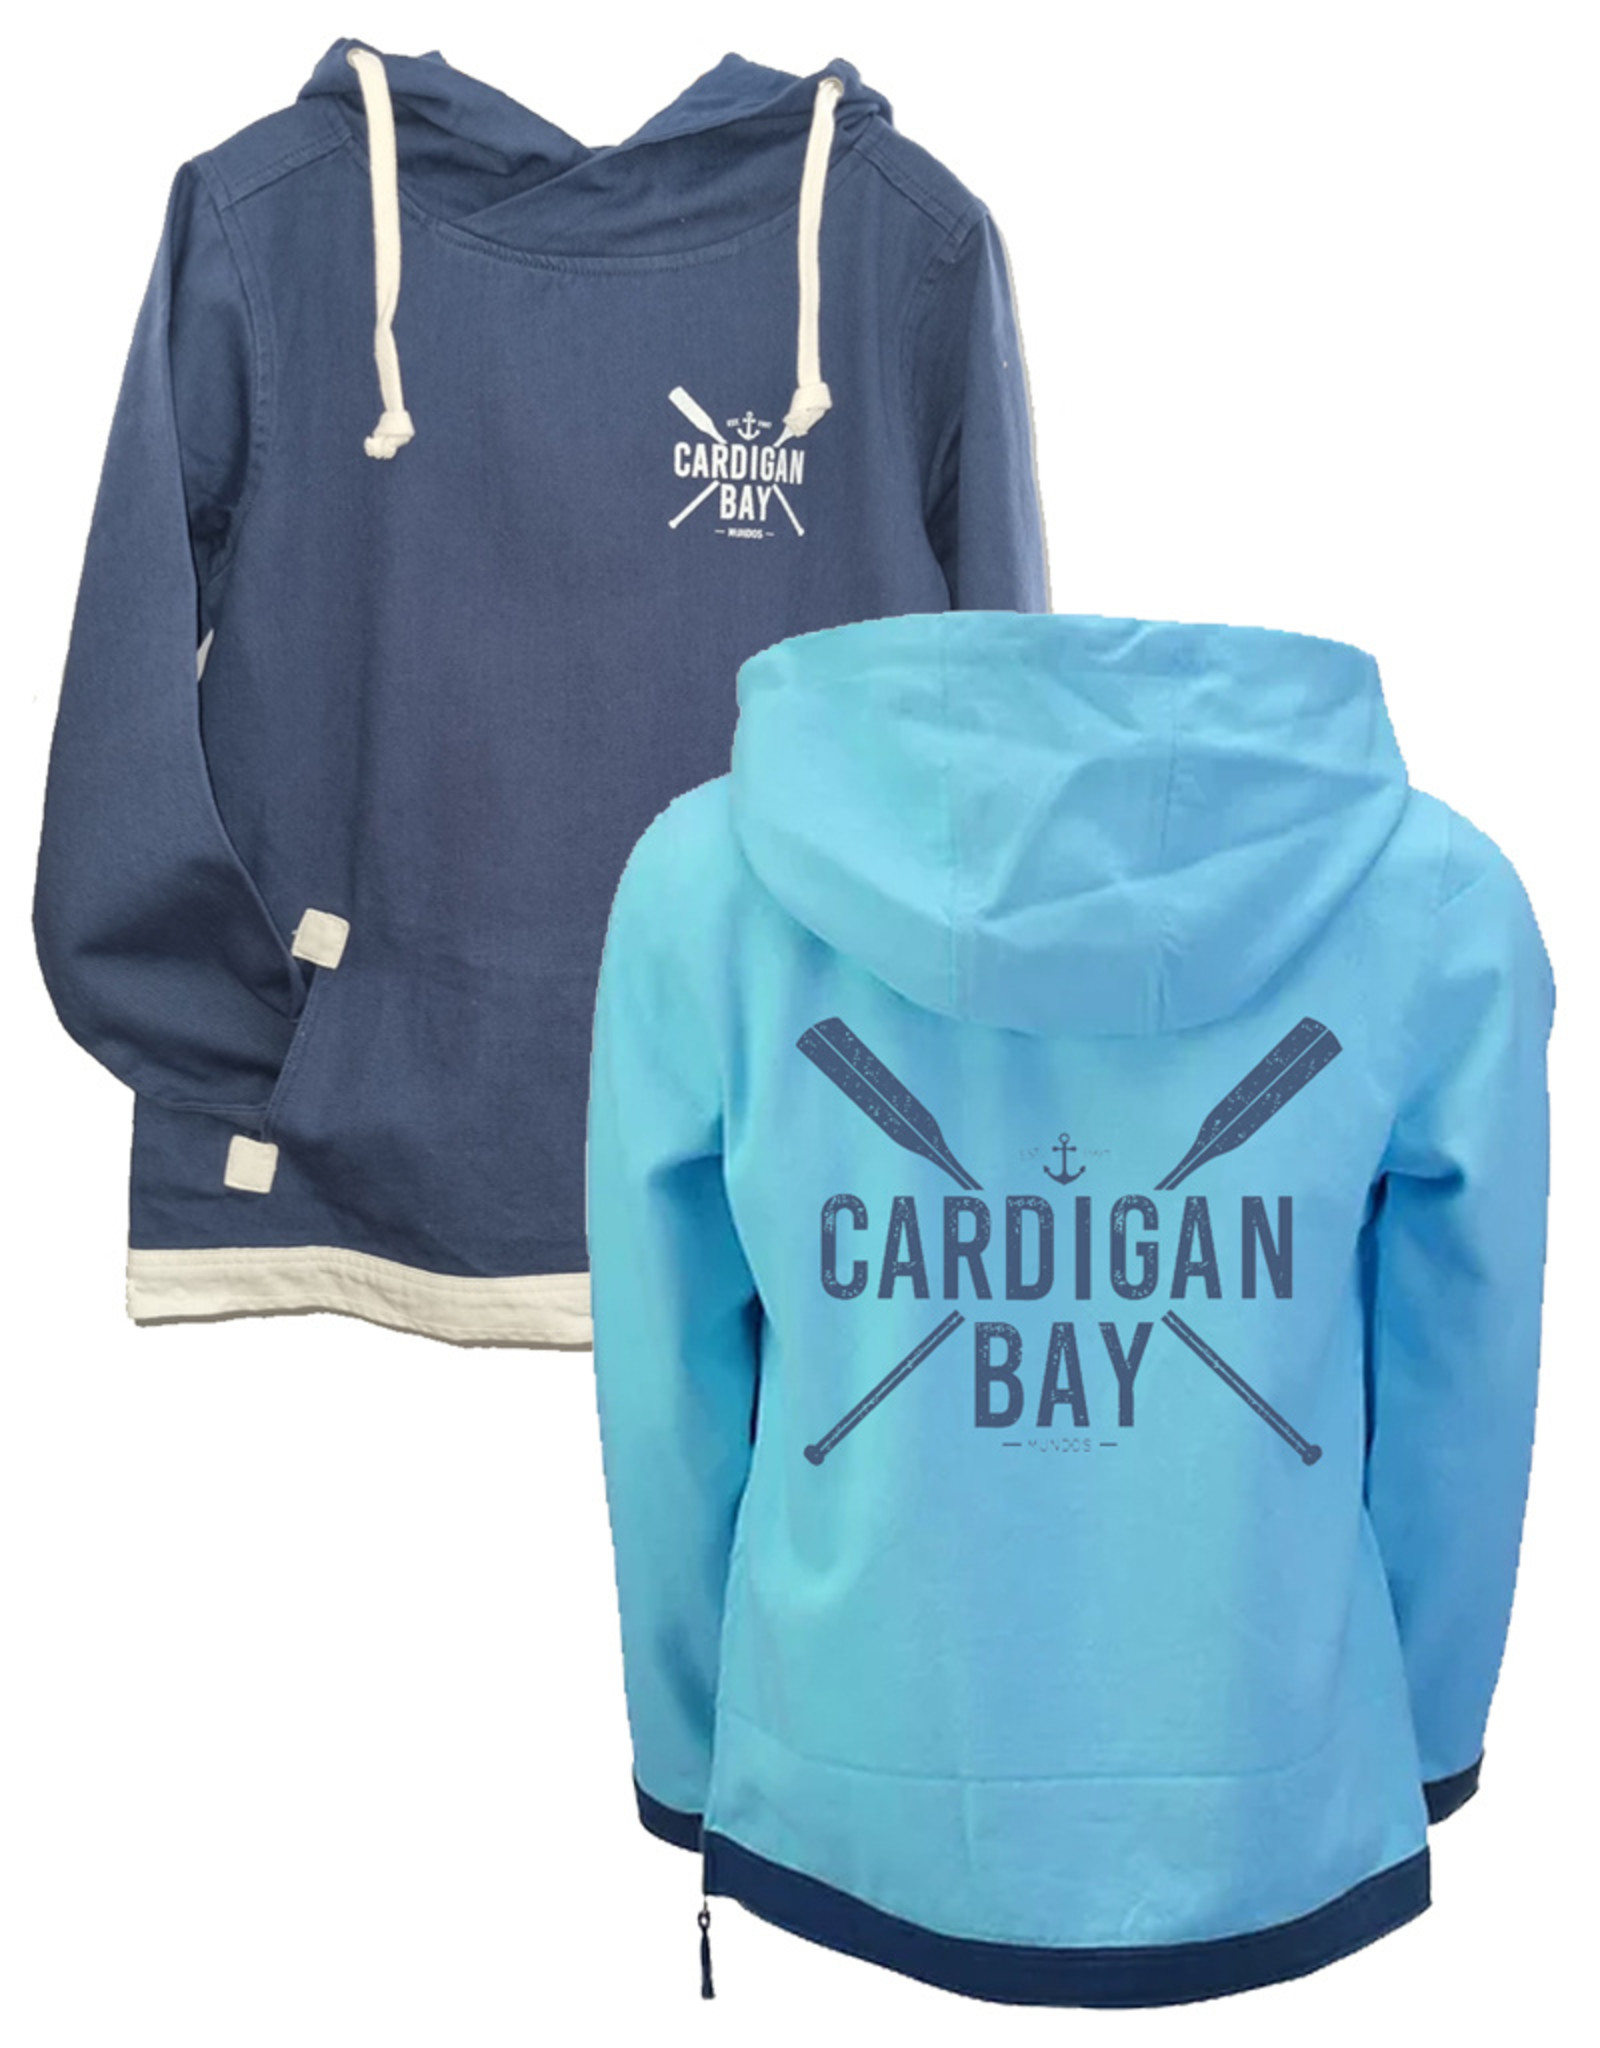 Stonewashed Clothing Sailcloth Hoody - Oars